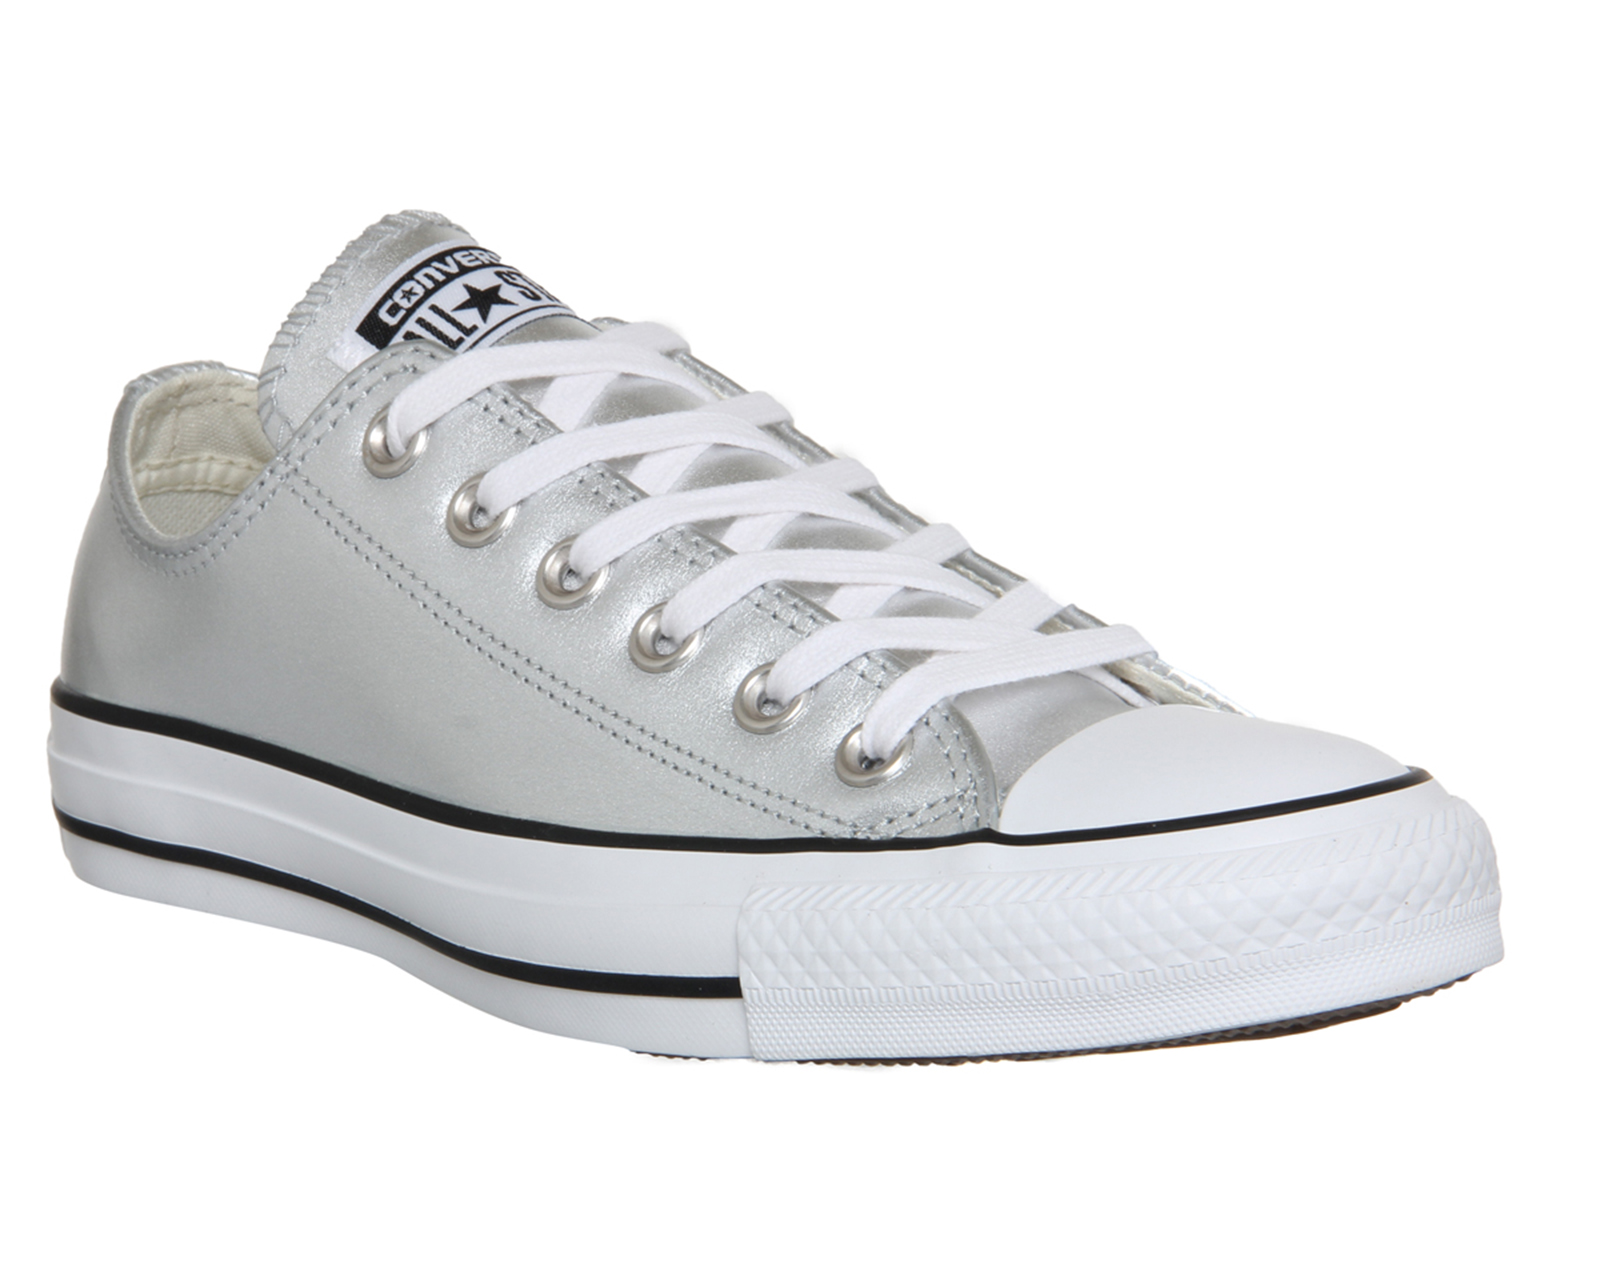 Converse All Star Low Leather Silver Metallic - Unisex Sports